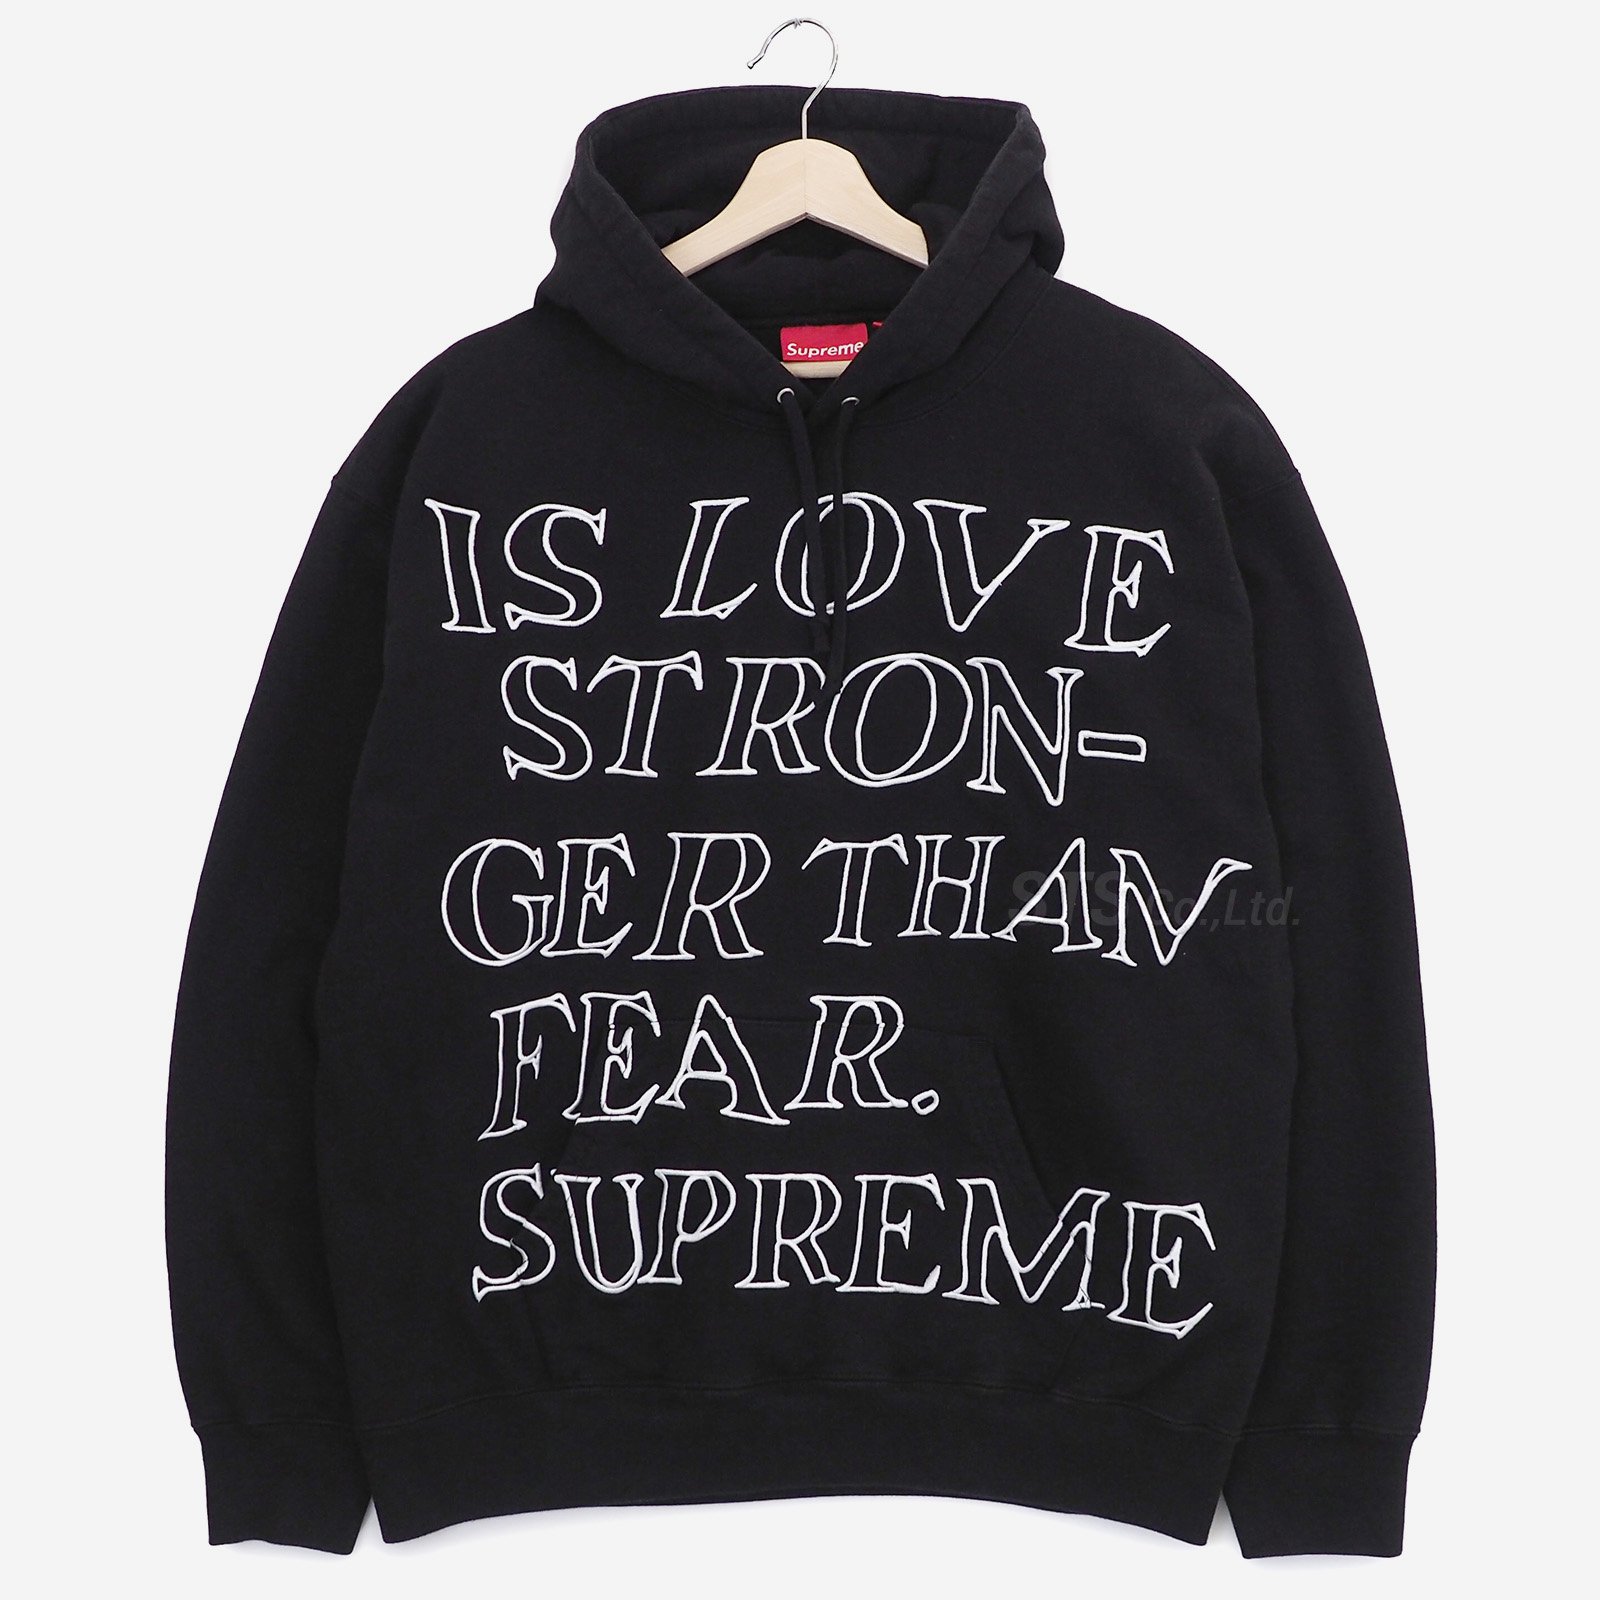 week3Supreme Stronger Than Fear Hooded パーカー